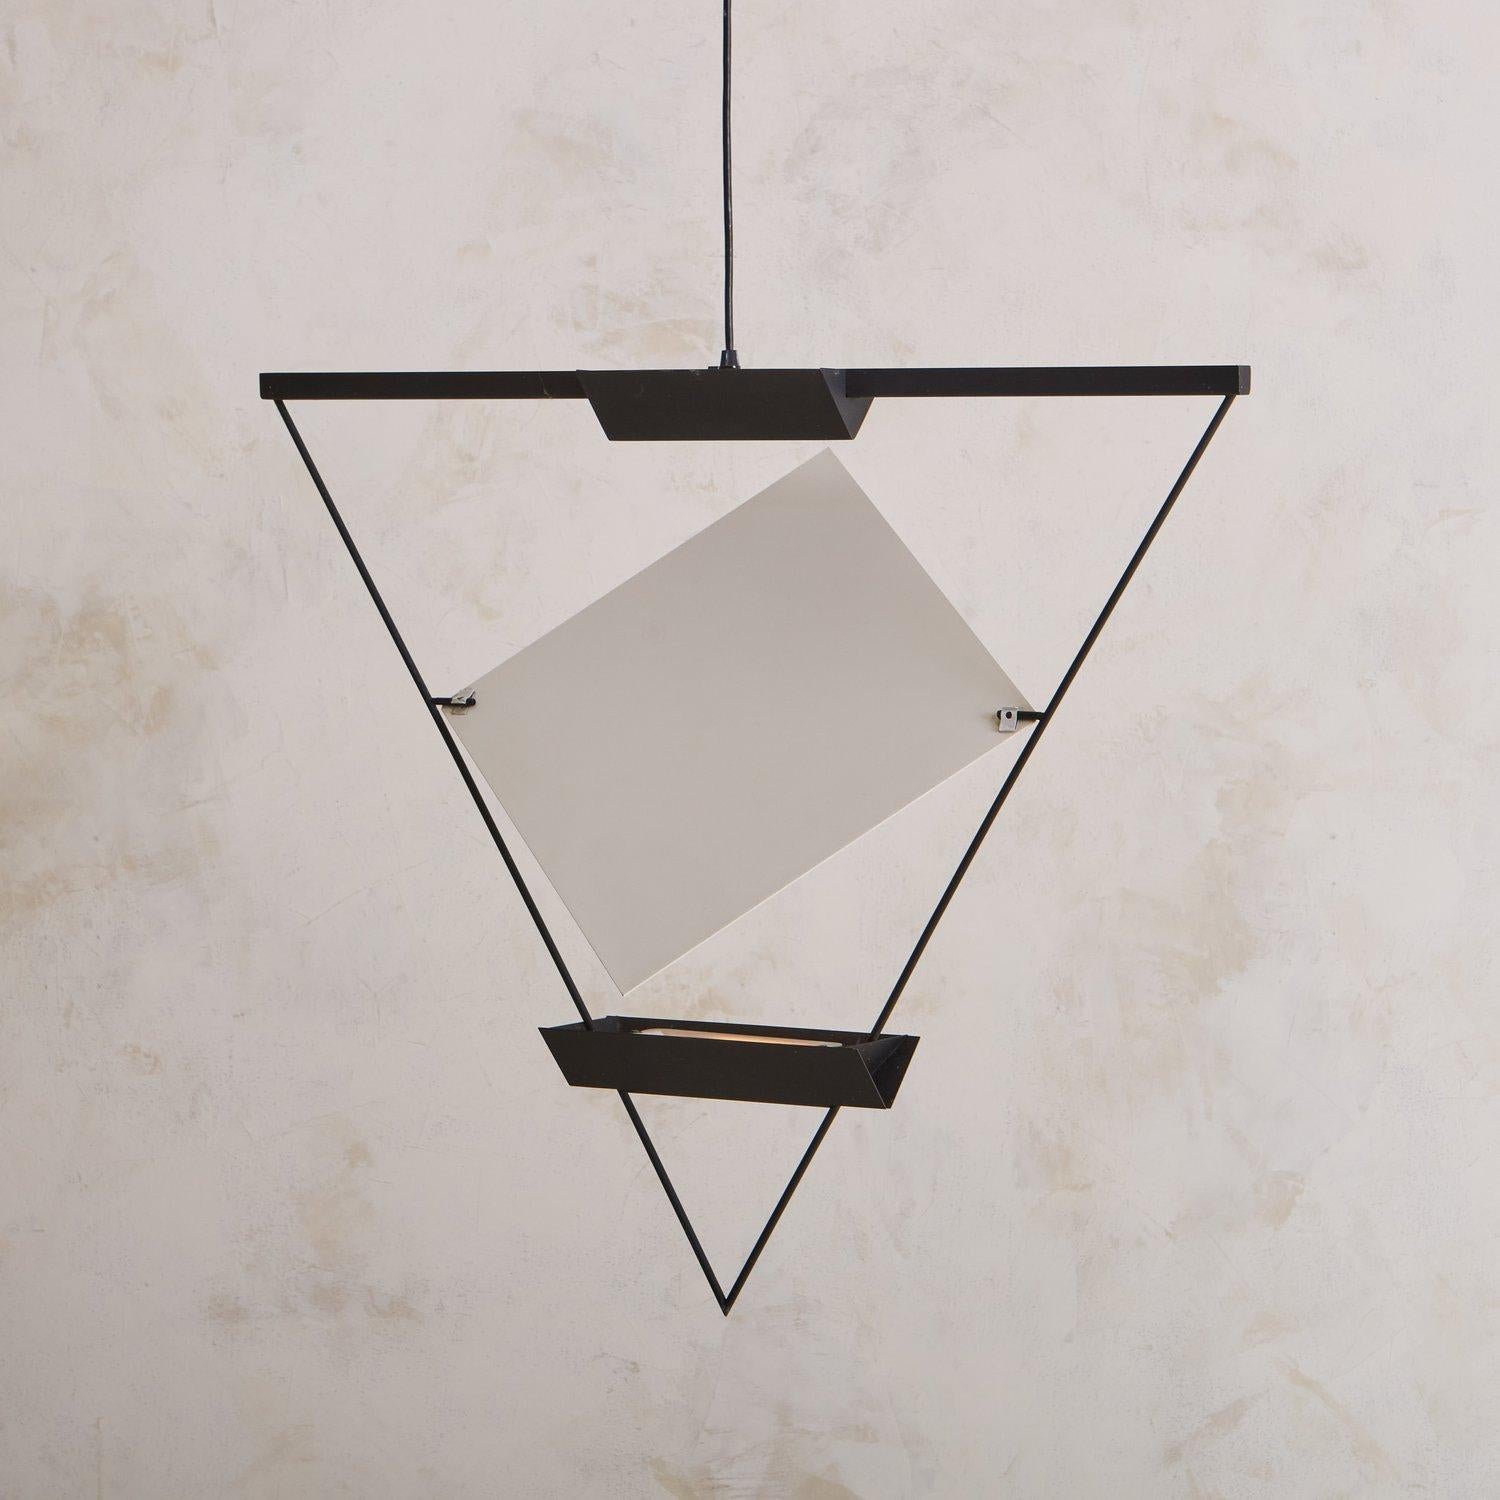 Designed by Swiss Architect Mario Botta (b.1943) for Artemide in the 1980s, this triangular pendant light has a black enameled metal frame which houses two halogen bulbs. An adjustable white diamond shaped panel casts a beautiful ambient up and down